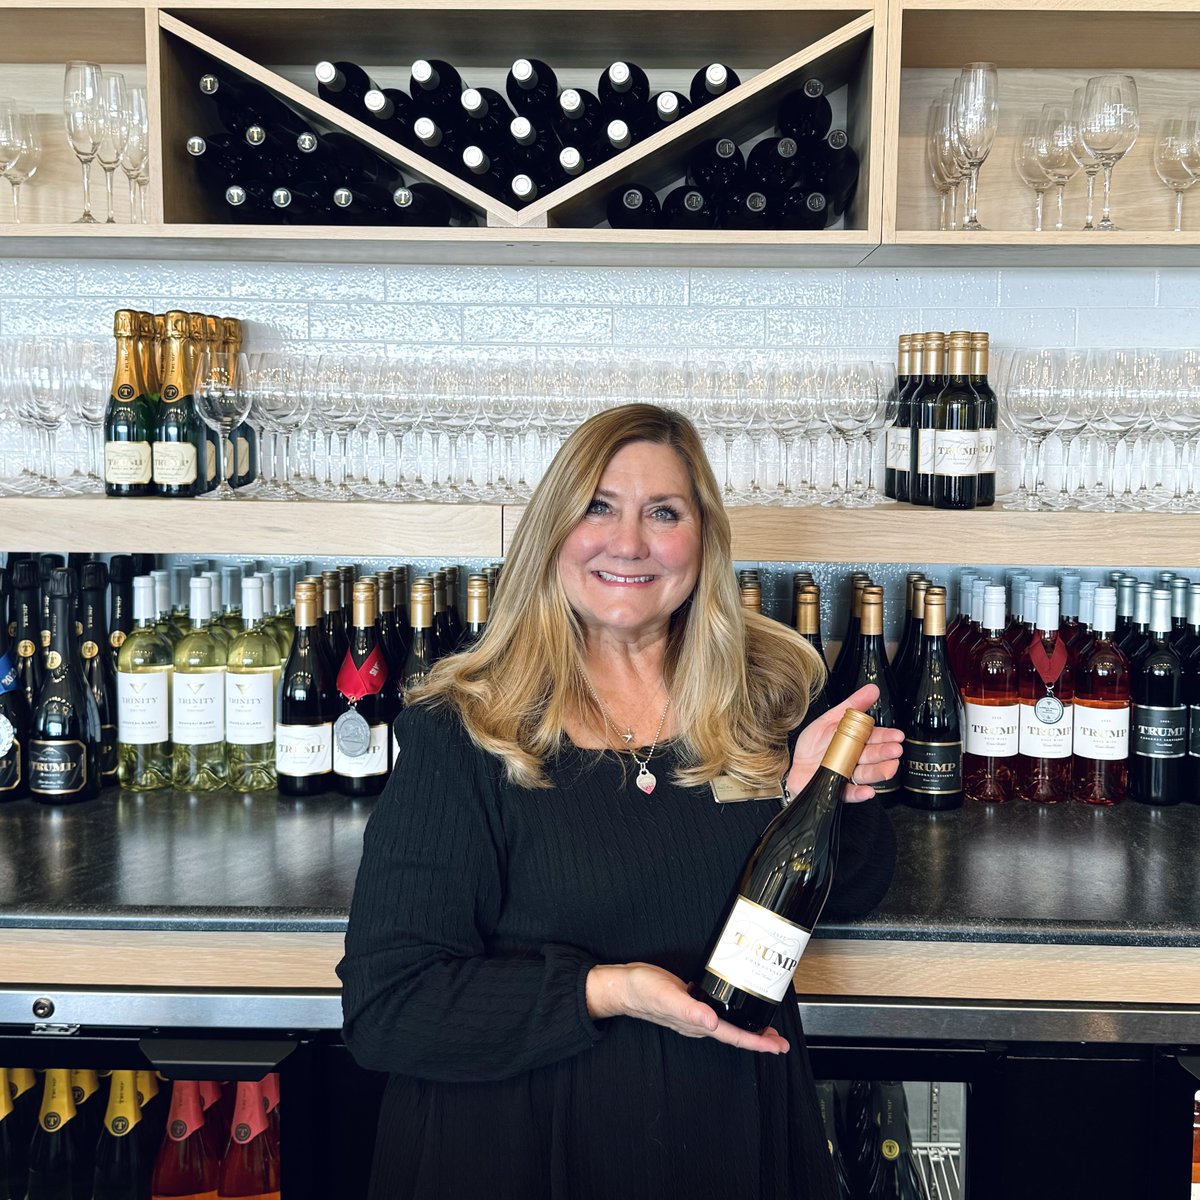 Today's staff pick is from Tasting Room Associate, Judy! Our Chardonnay is a delightful blend of refreshing crispness and velvety creaminess. Boasting with notes of citrus, green apple, white peach, and a touch of vanilla!

#TrumpWinery #NeverSettle #StaffPick #WhiteWine